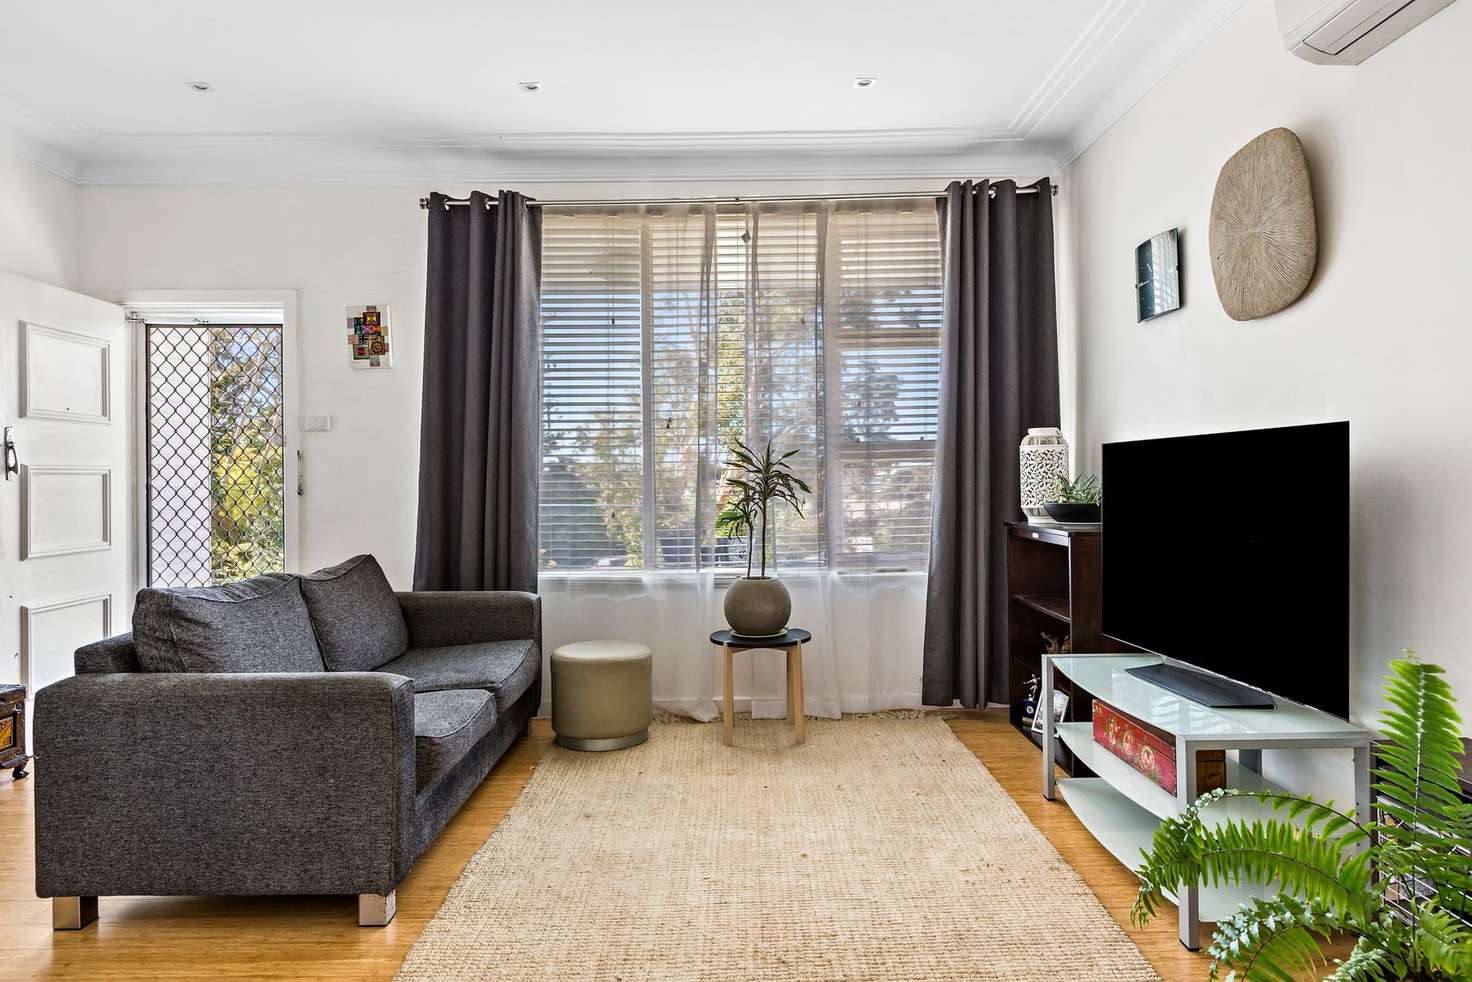 Main view of Homely house listing, 1 Dudley Road, Charlestown NSW 2290